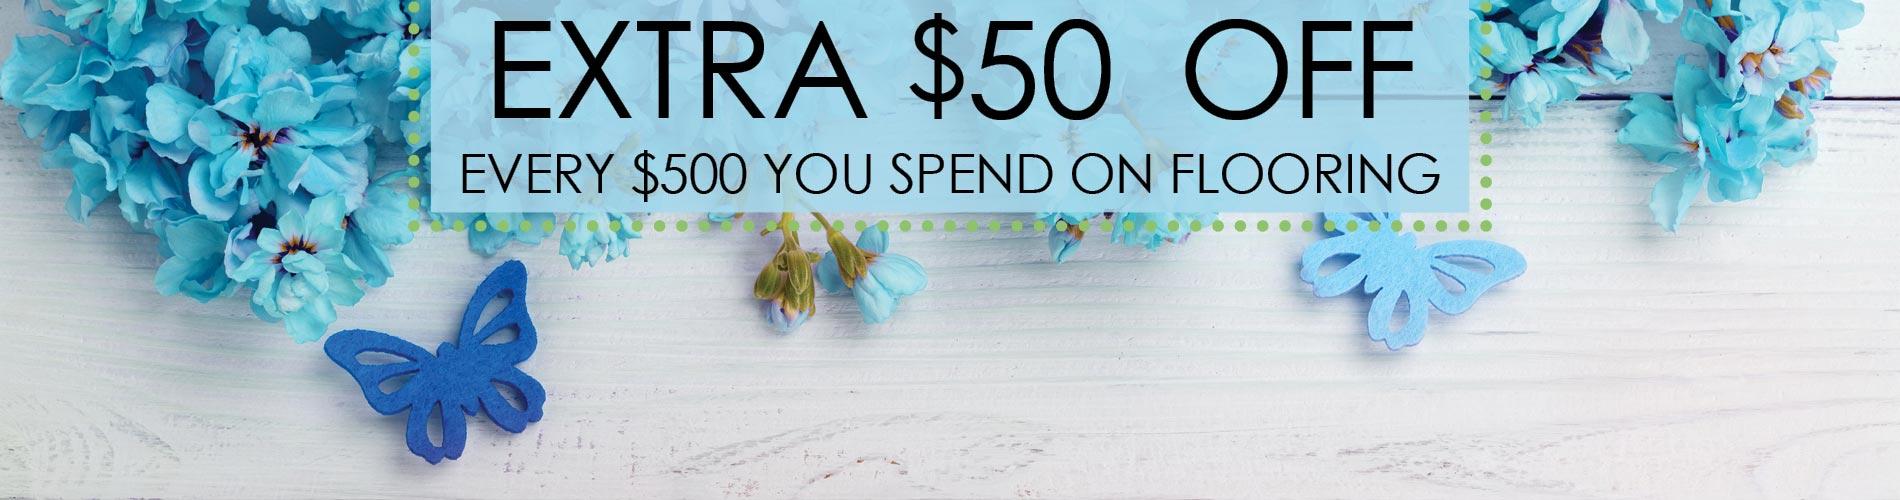 Extra $50 off every $500 you spend on flooring